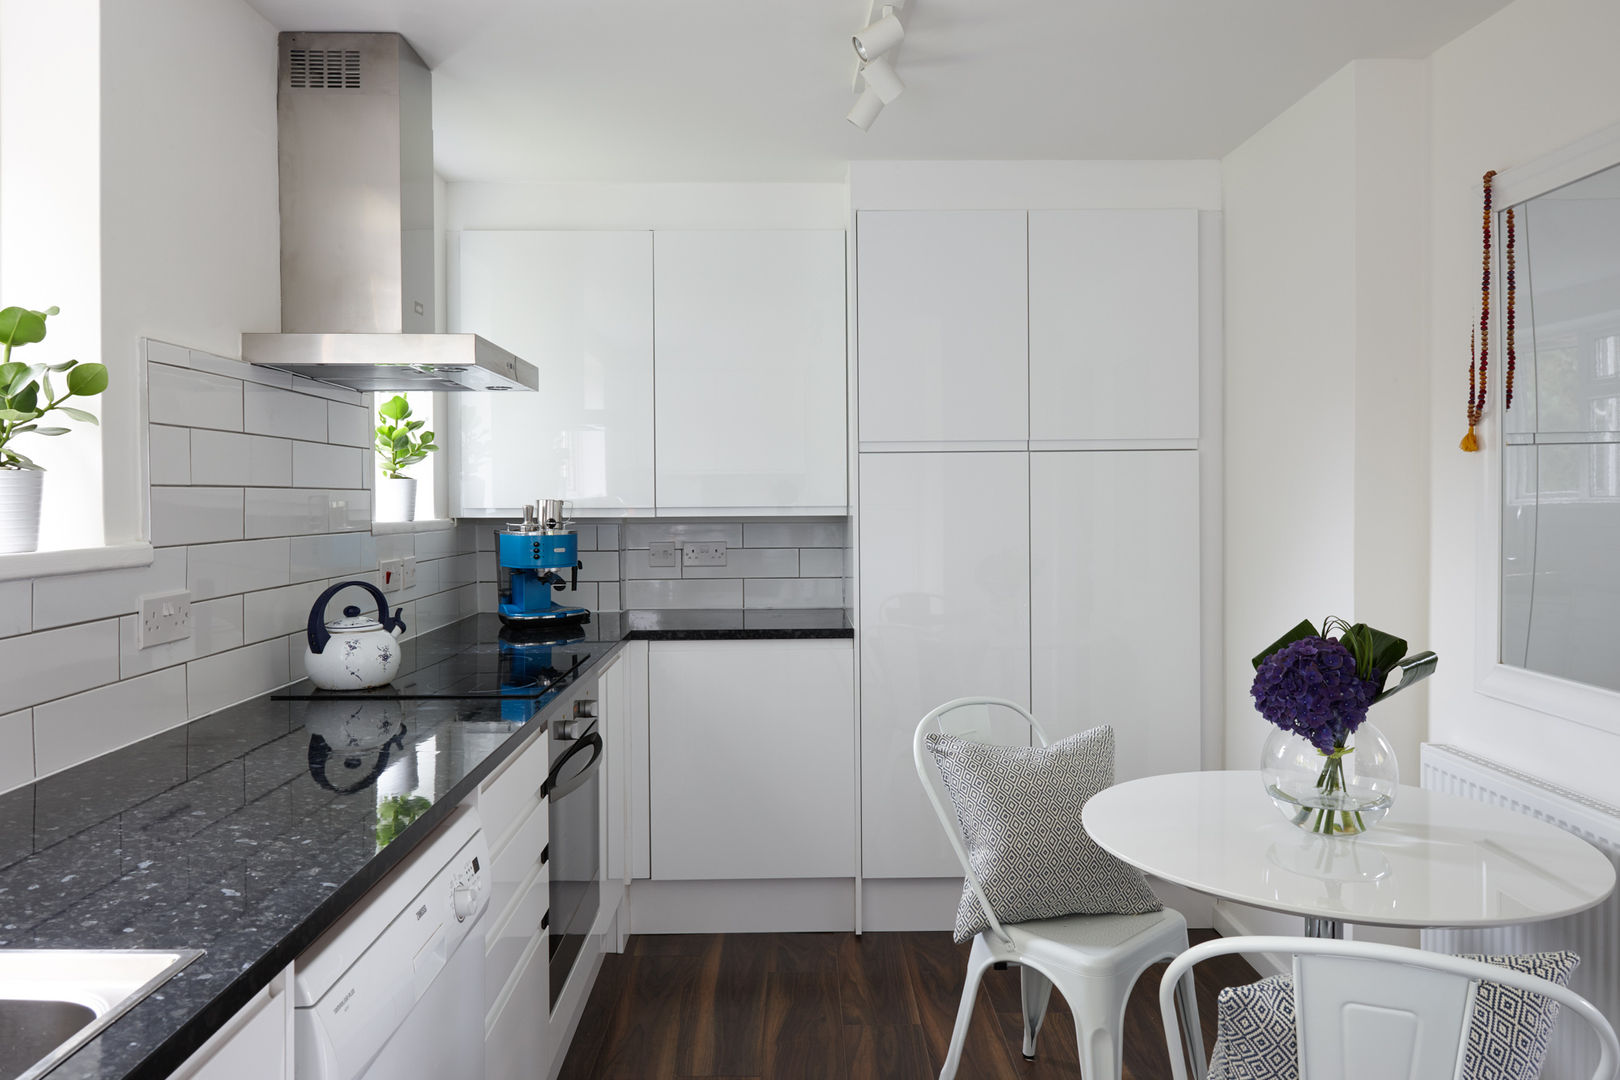 Virginia Water Apartment - Surrey Bhavin Taylor Design مطبخ kitchen,white,high gloss,blue,black,dining table,dining chairs,kettle,coffee machine,extractor fan